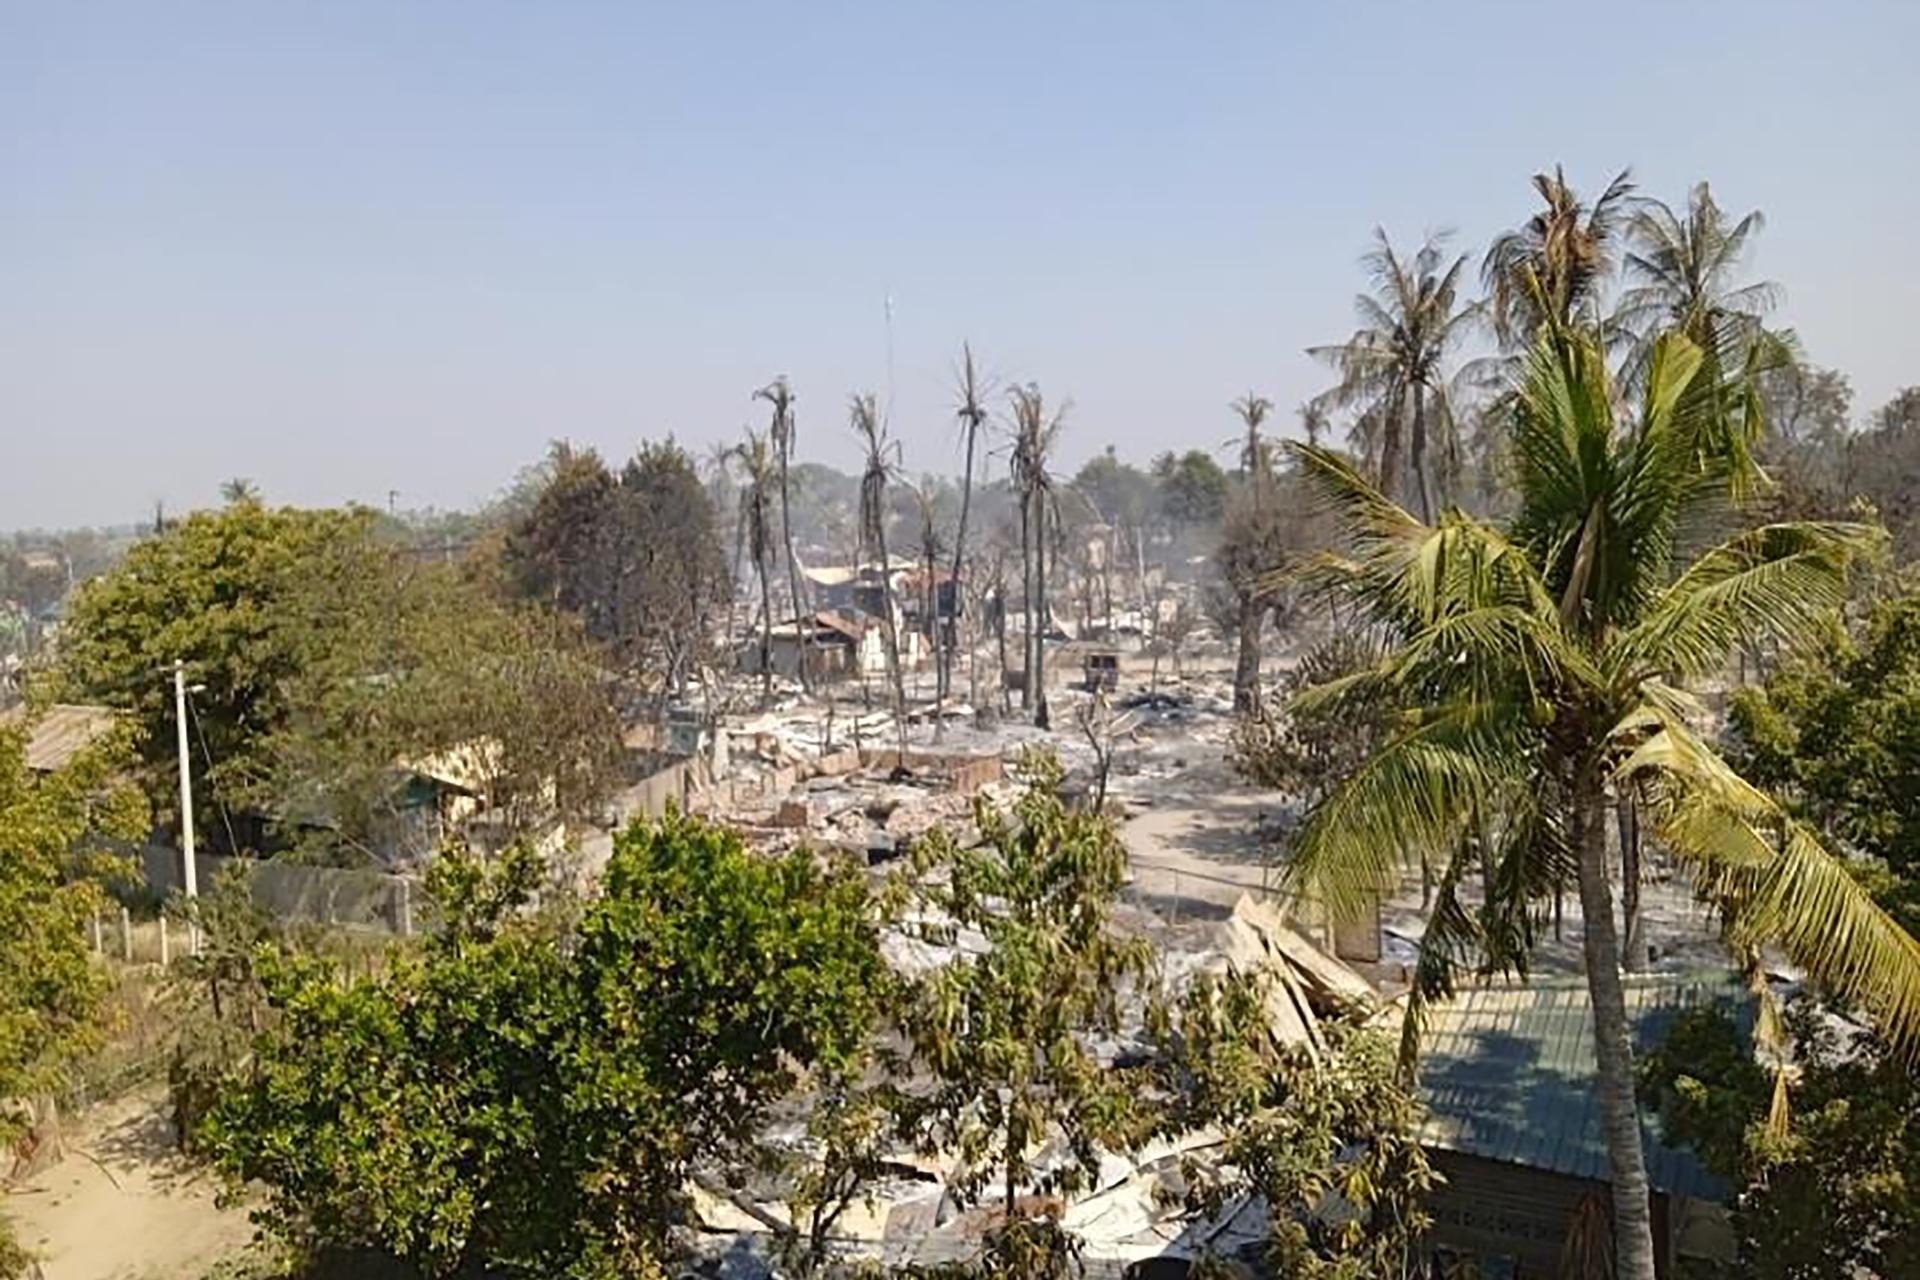 Charred houses sit in ash between the trees in Mwe Tone village of Pale township in the Sagaing region, Myanmar on Feb. 1, 2022. Mwe Tone was one of two villages residents and Myanmar news outlets said were burned down Monday, Jan. 31, 2022, by soldiers t